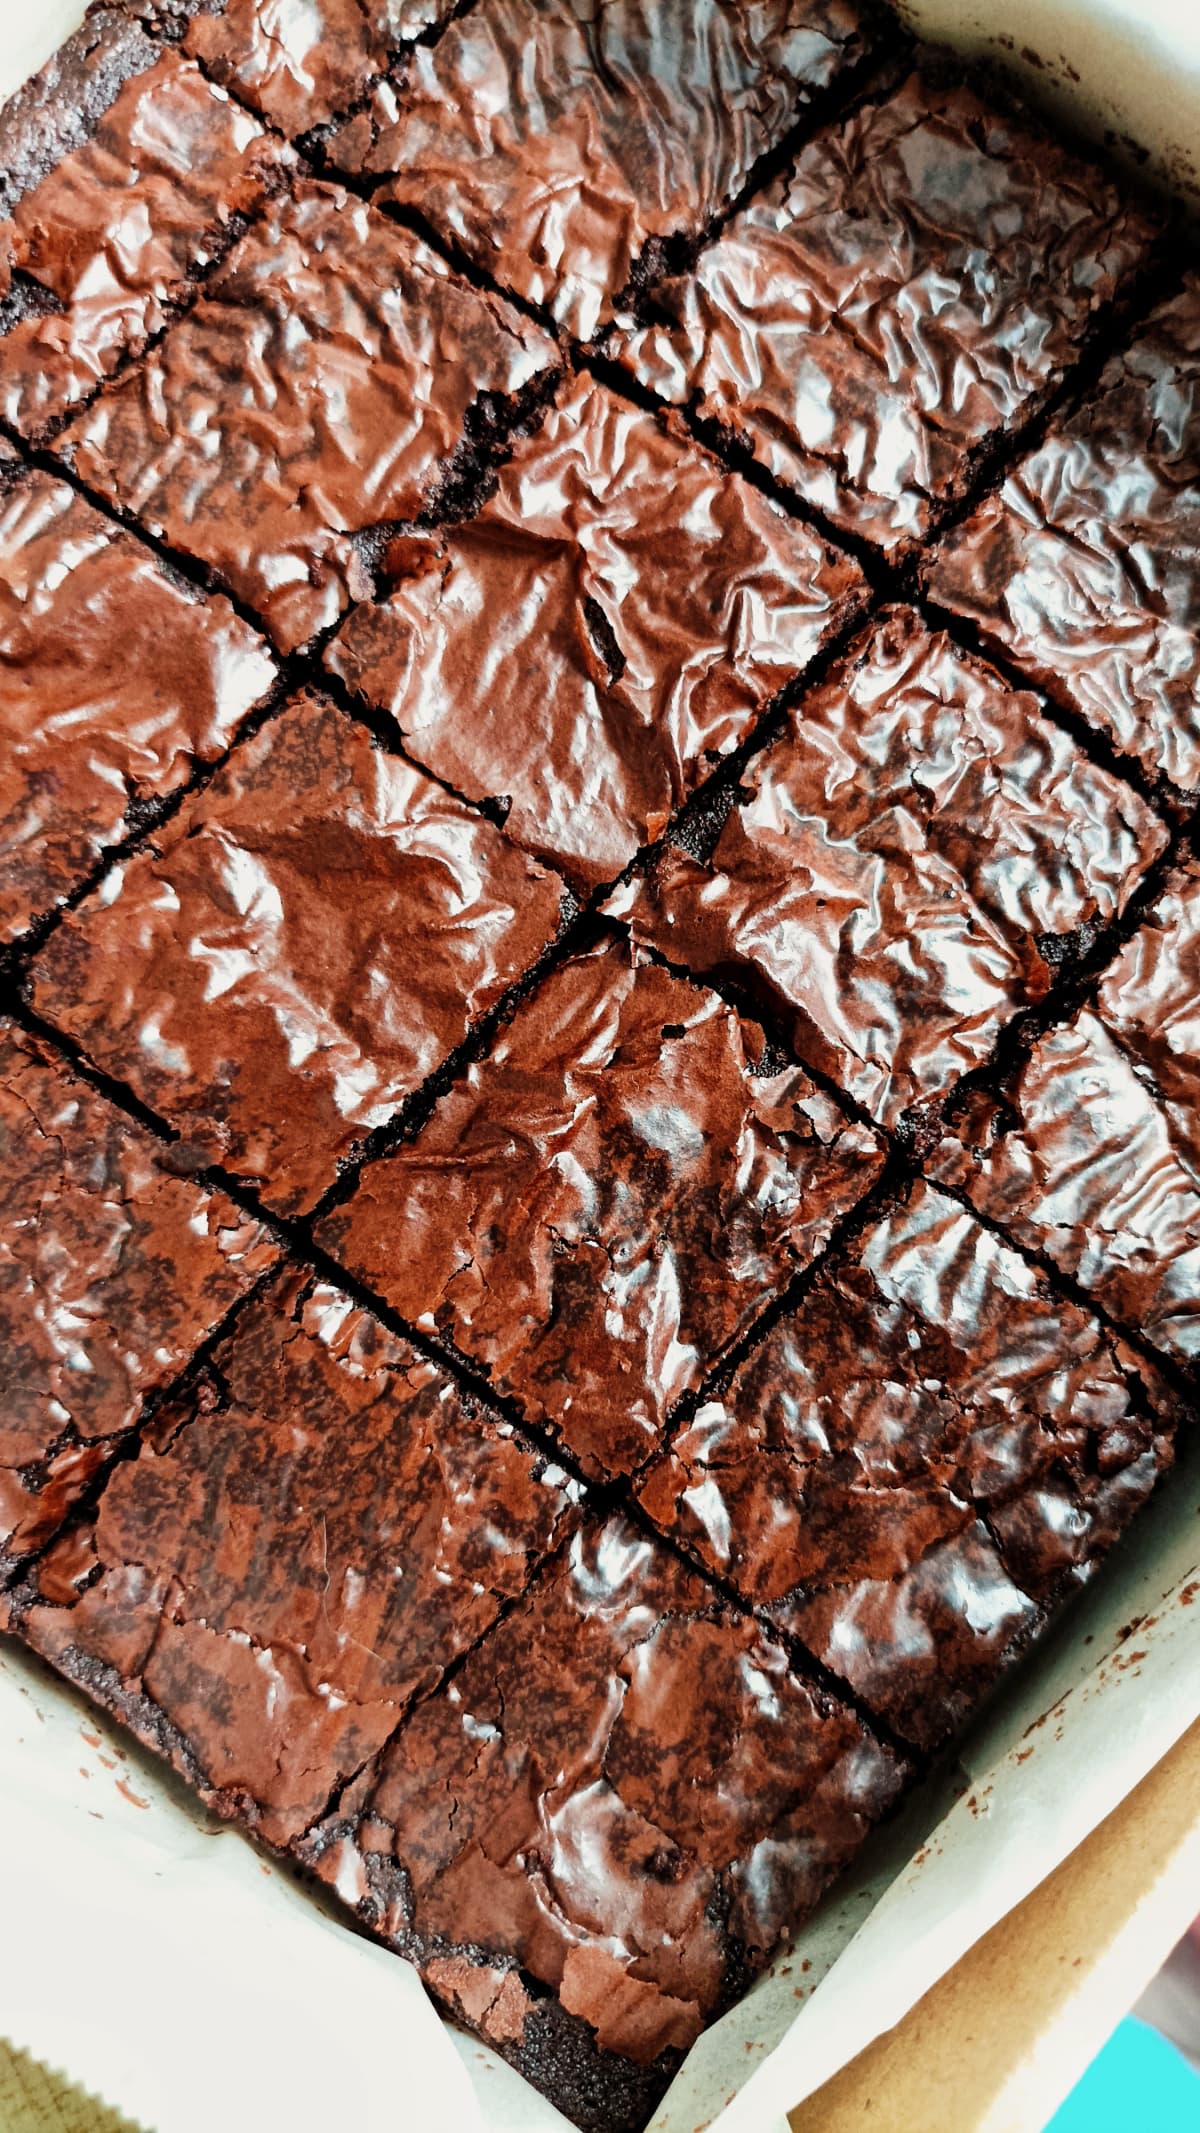 Fudgy brownies with a beautiful shiny crust